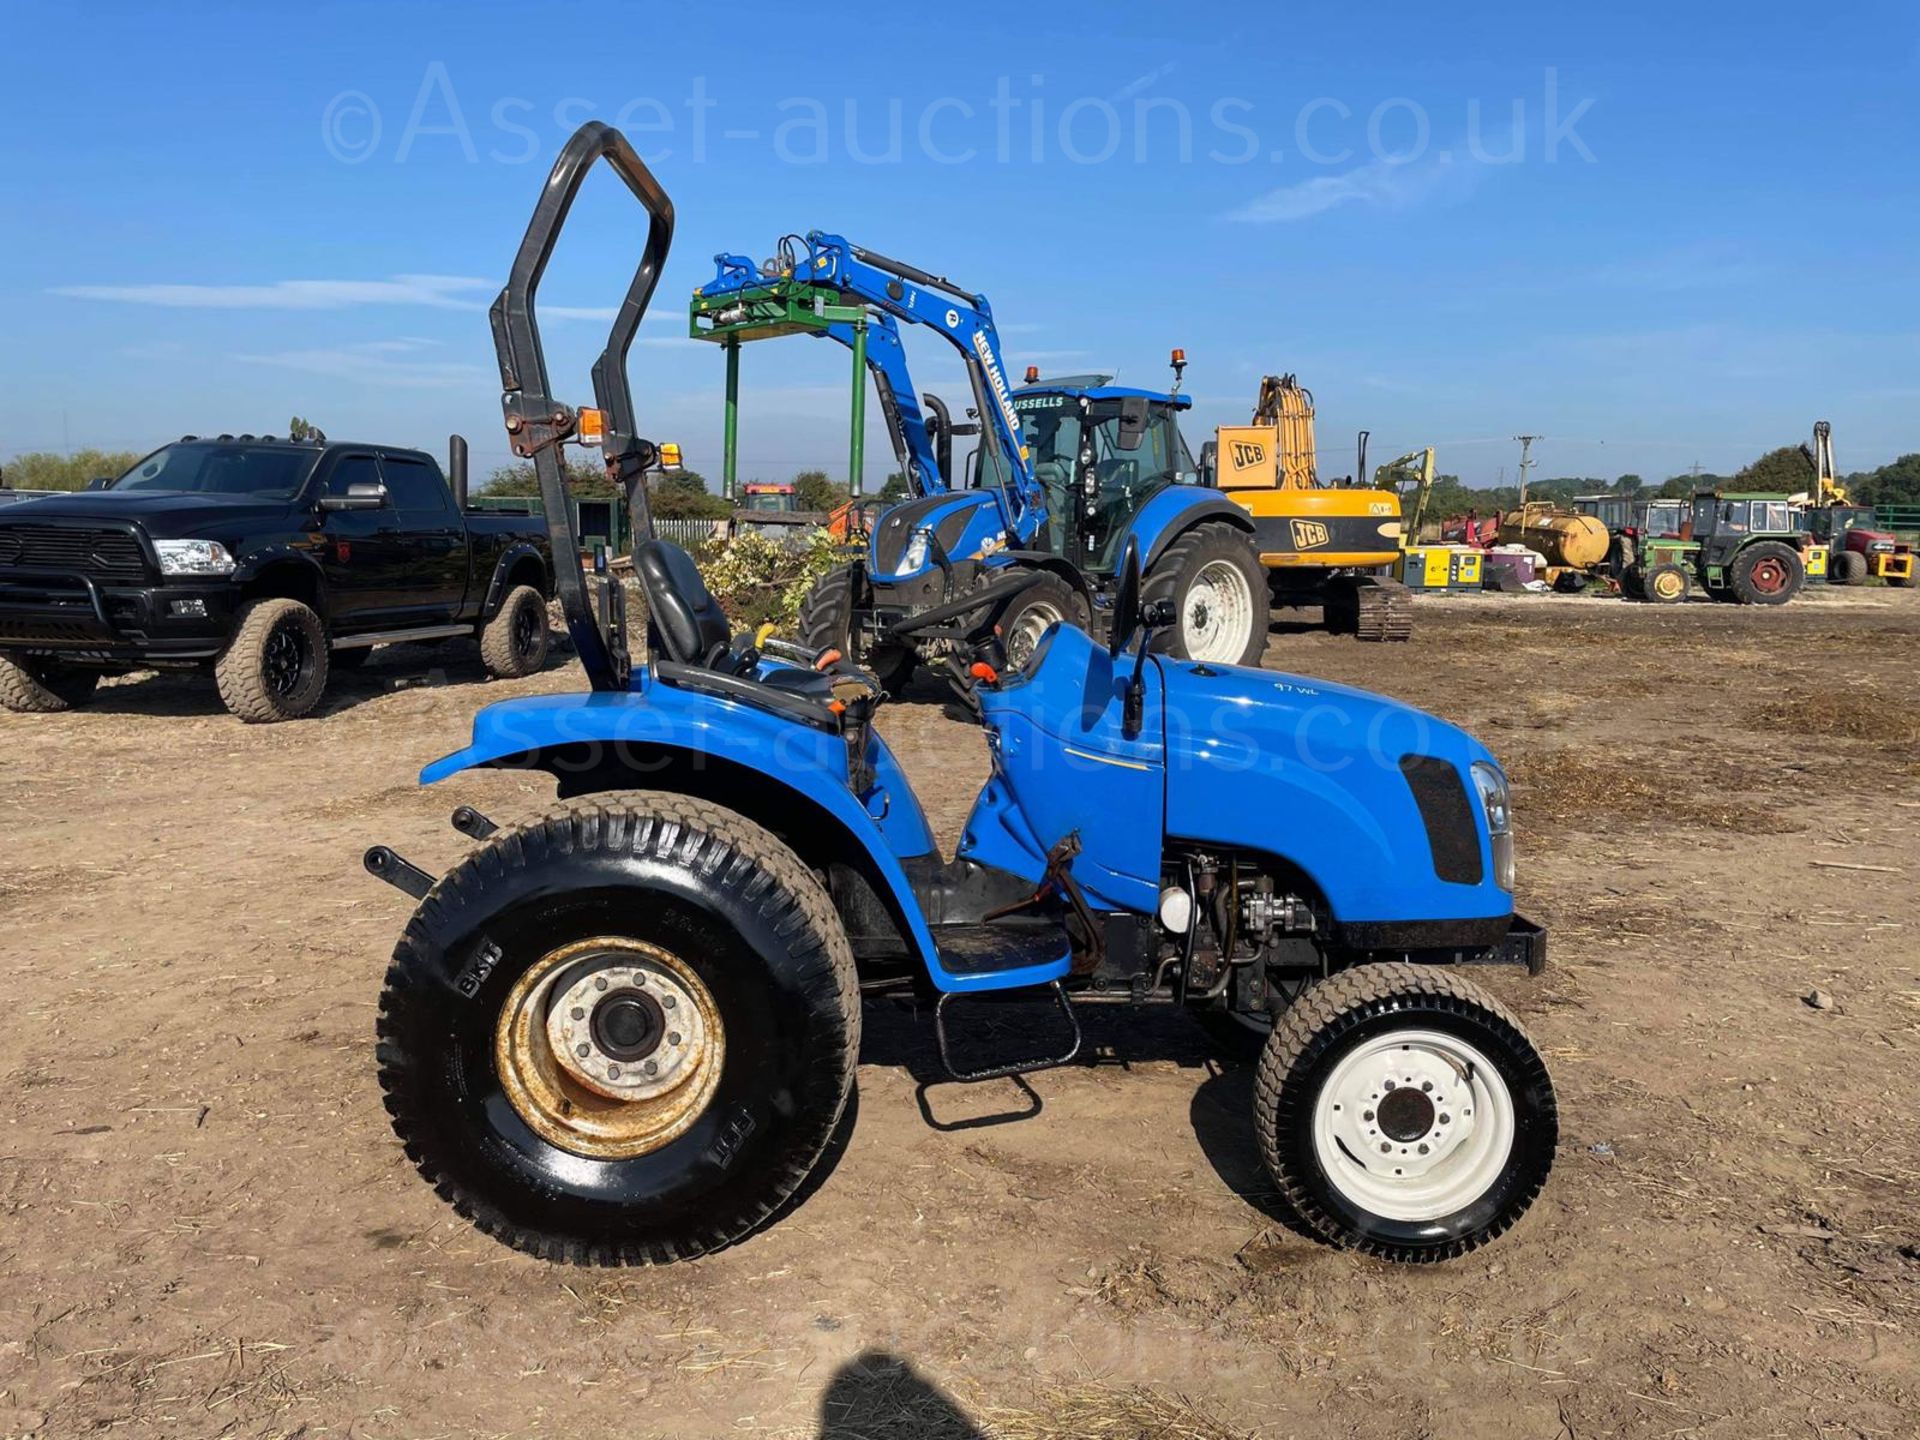 2005 NEW HOLLAND TC27DA 27hp 4WD COMPACT TRACTOR, RUNS DRIVES AND WORKS WELL, ROAD REGISTERED - Image 2 of 26